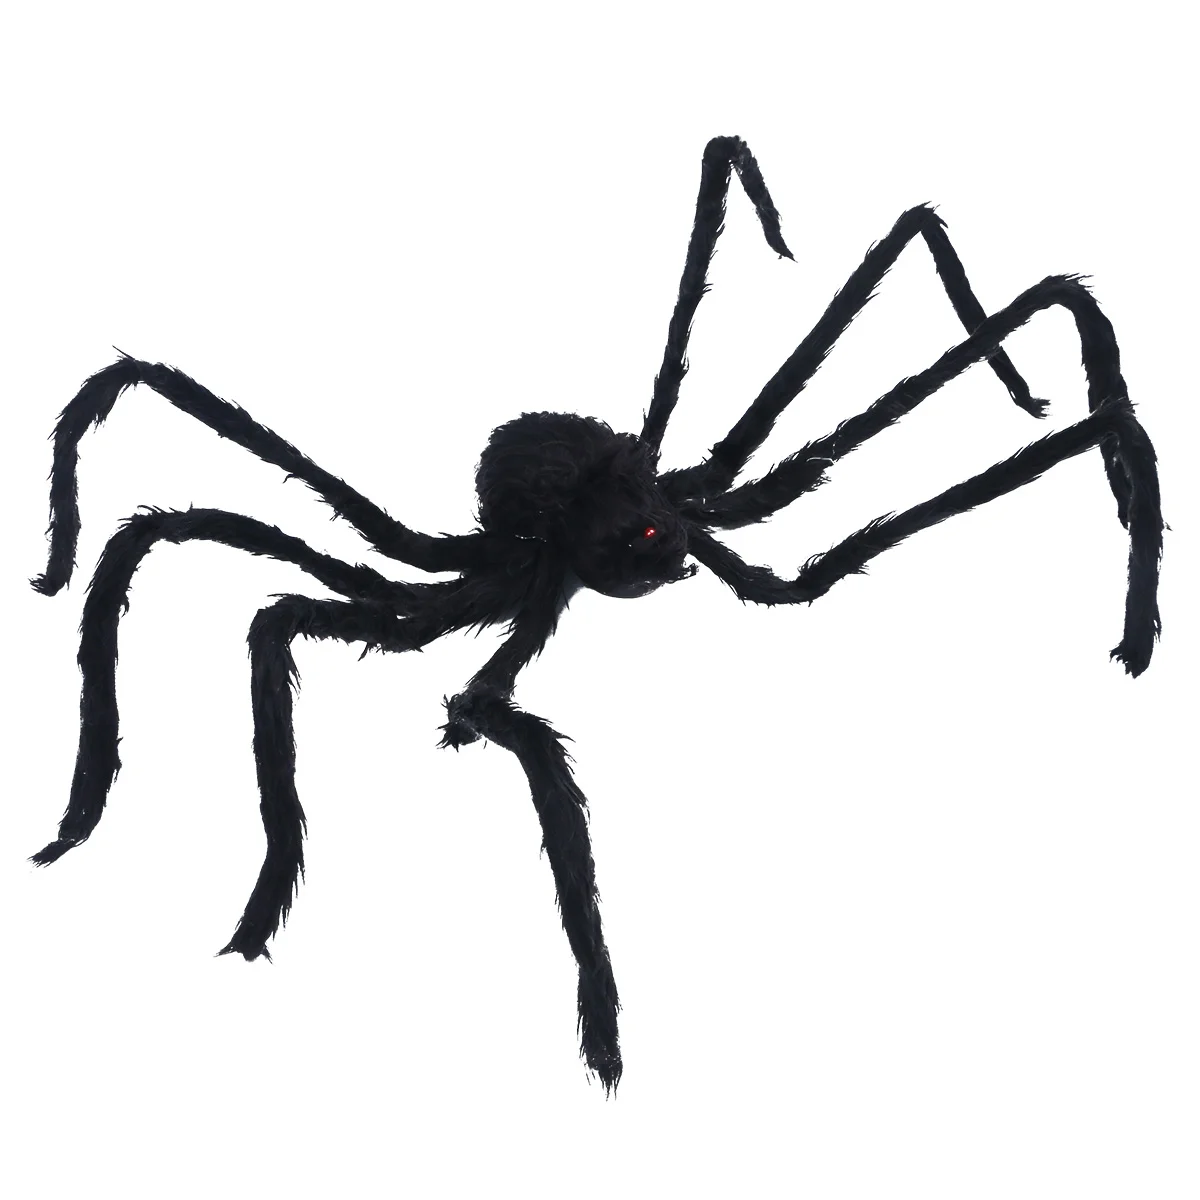 

Spider Halloween Decorations Cosplay Fake Props Outdoor Black Scary Plush Party Decoration Spiders Prop Prank Simulation